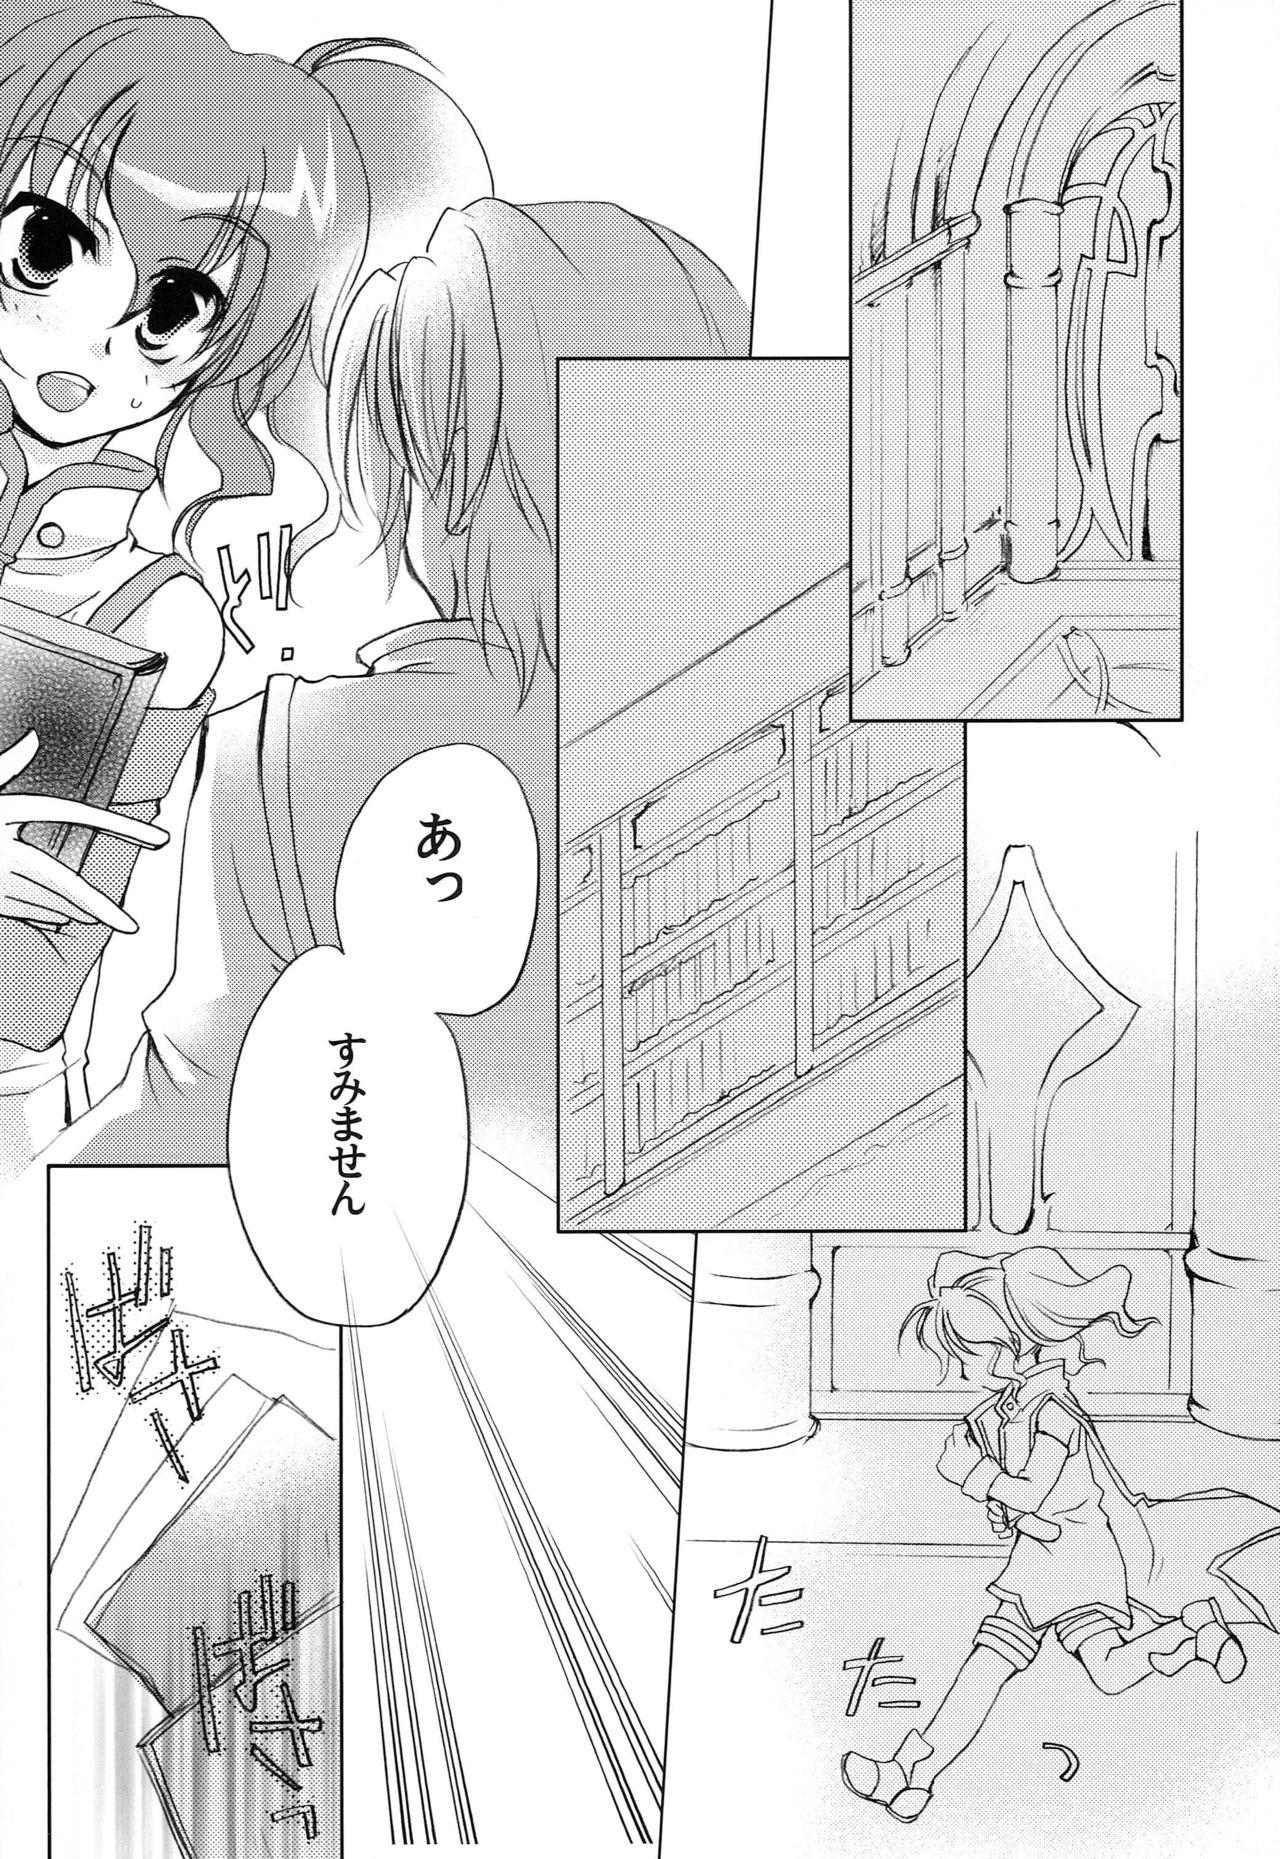 First Carnation, Lily, Lily, Rose - Tales of the abyss Hot Couple Sex - Page 3